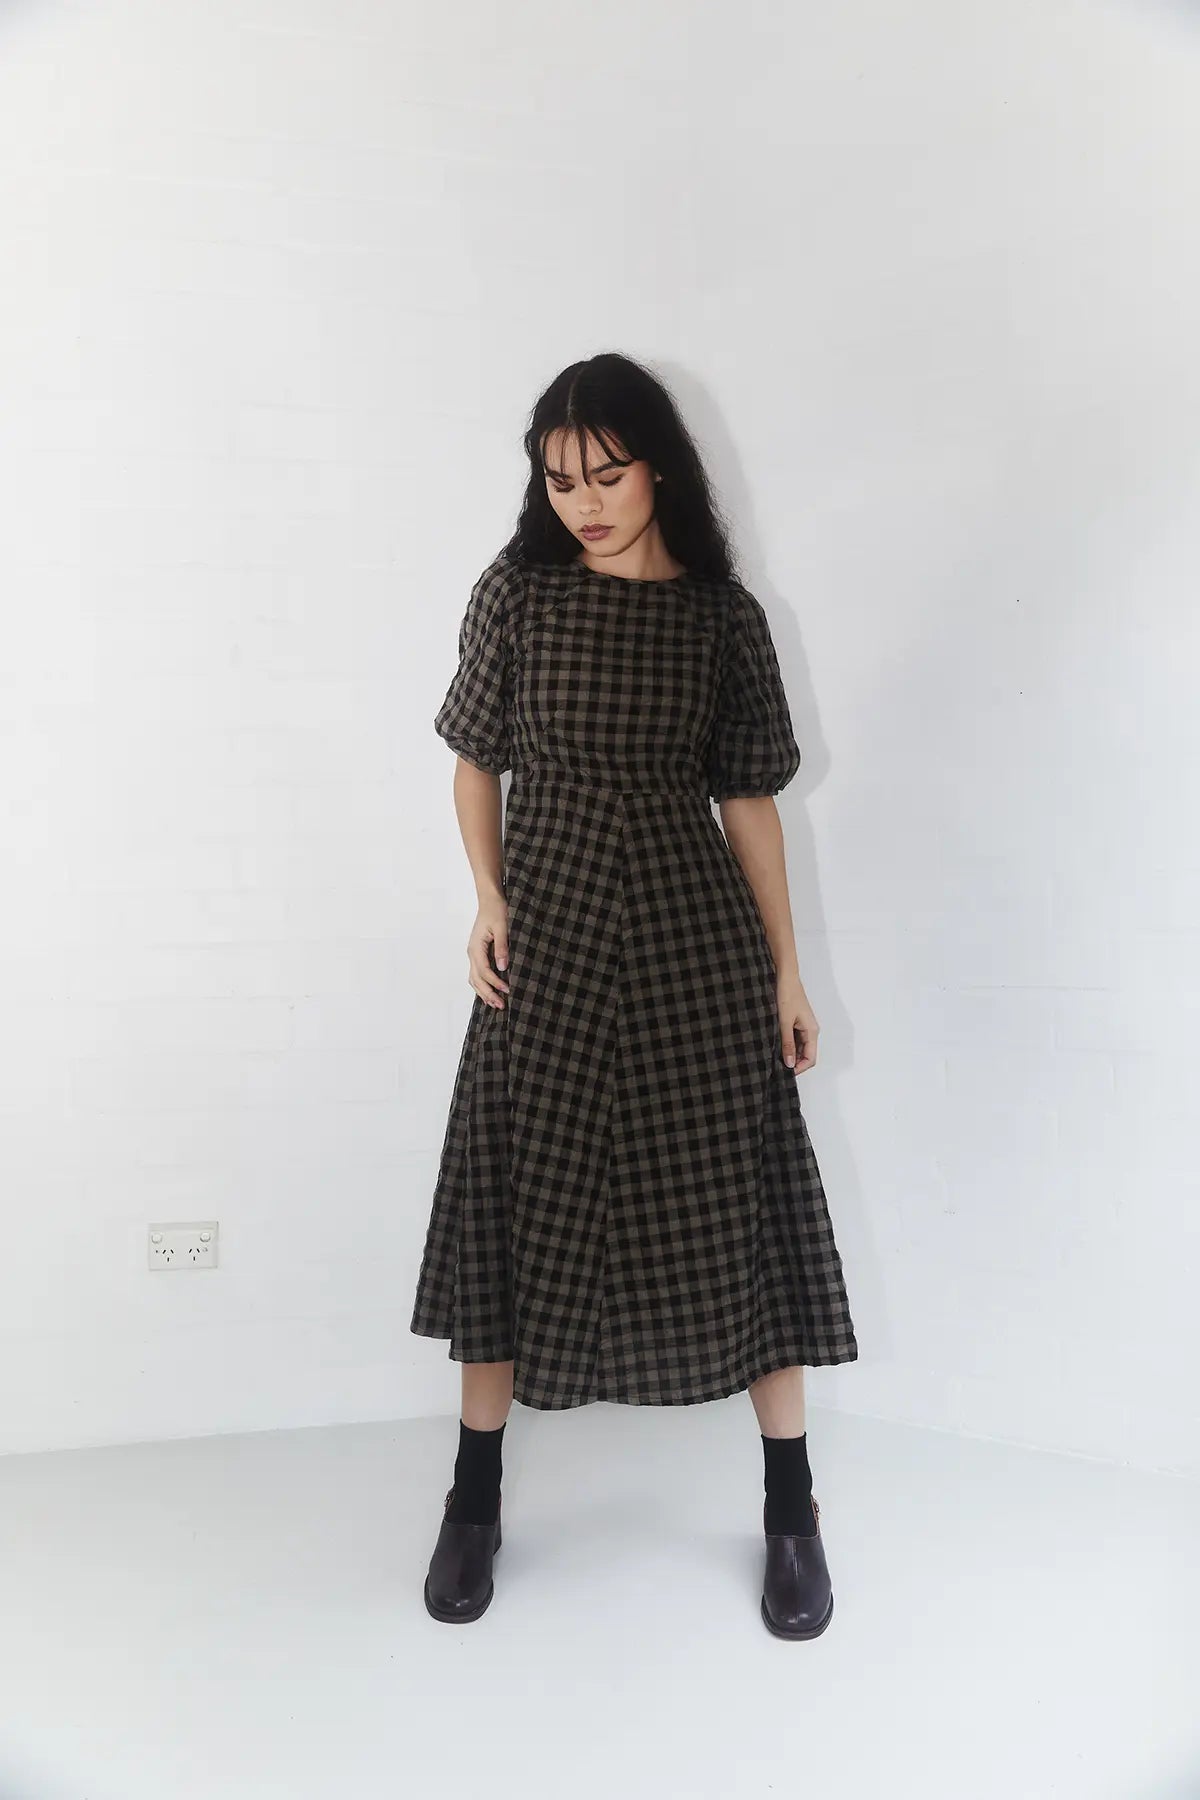 model standing in a line gingham dress colour mocha and black 